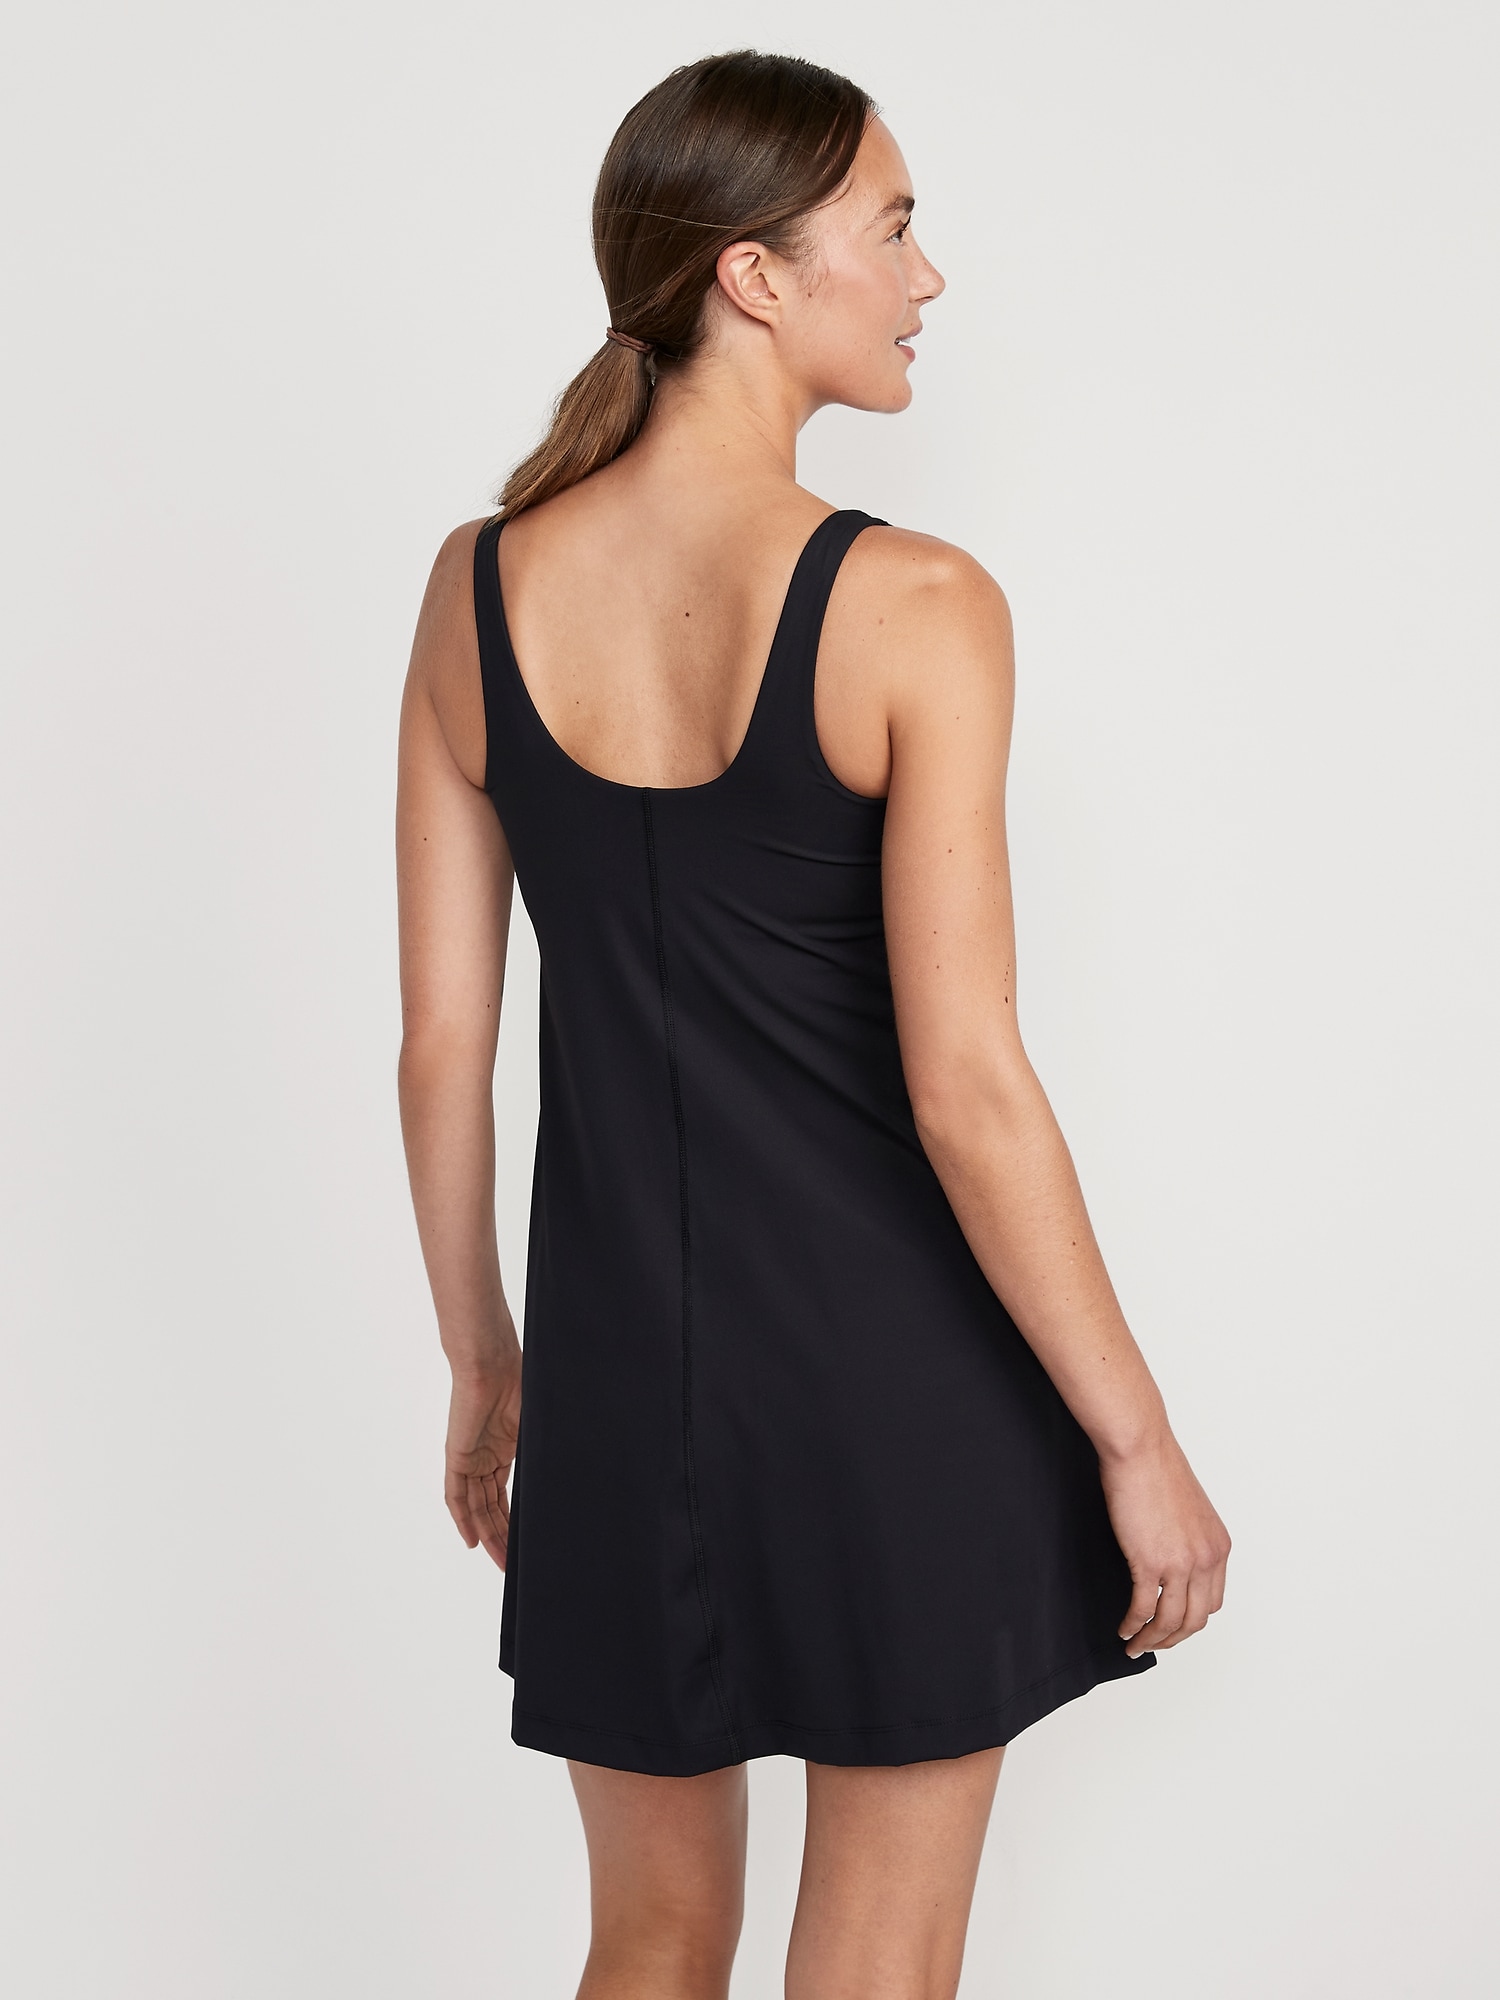 OLD NAVY NEW with TAG Women's PowerSoft Sleeveless Shelf-Bra Support Dress  - M